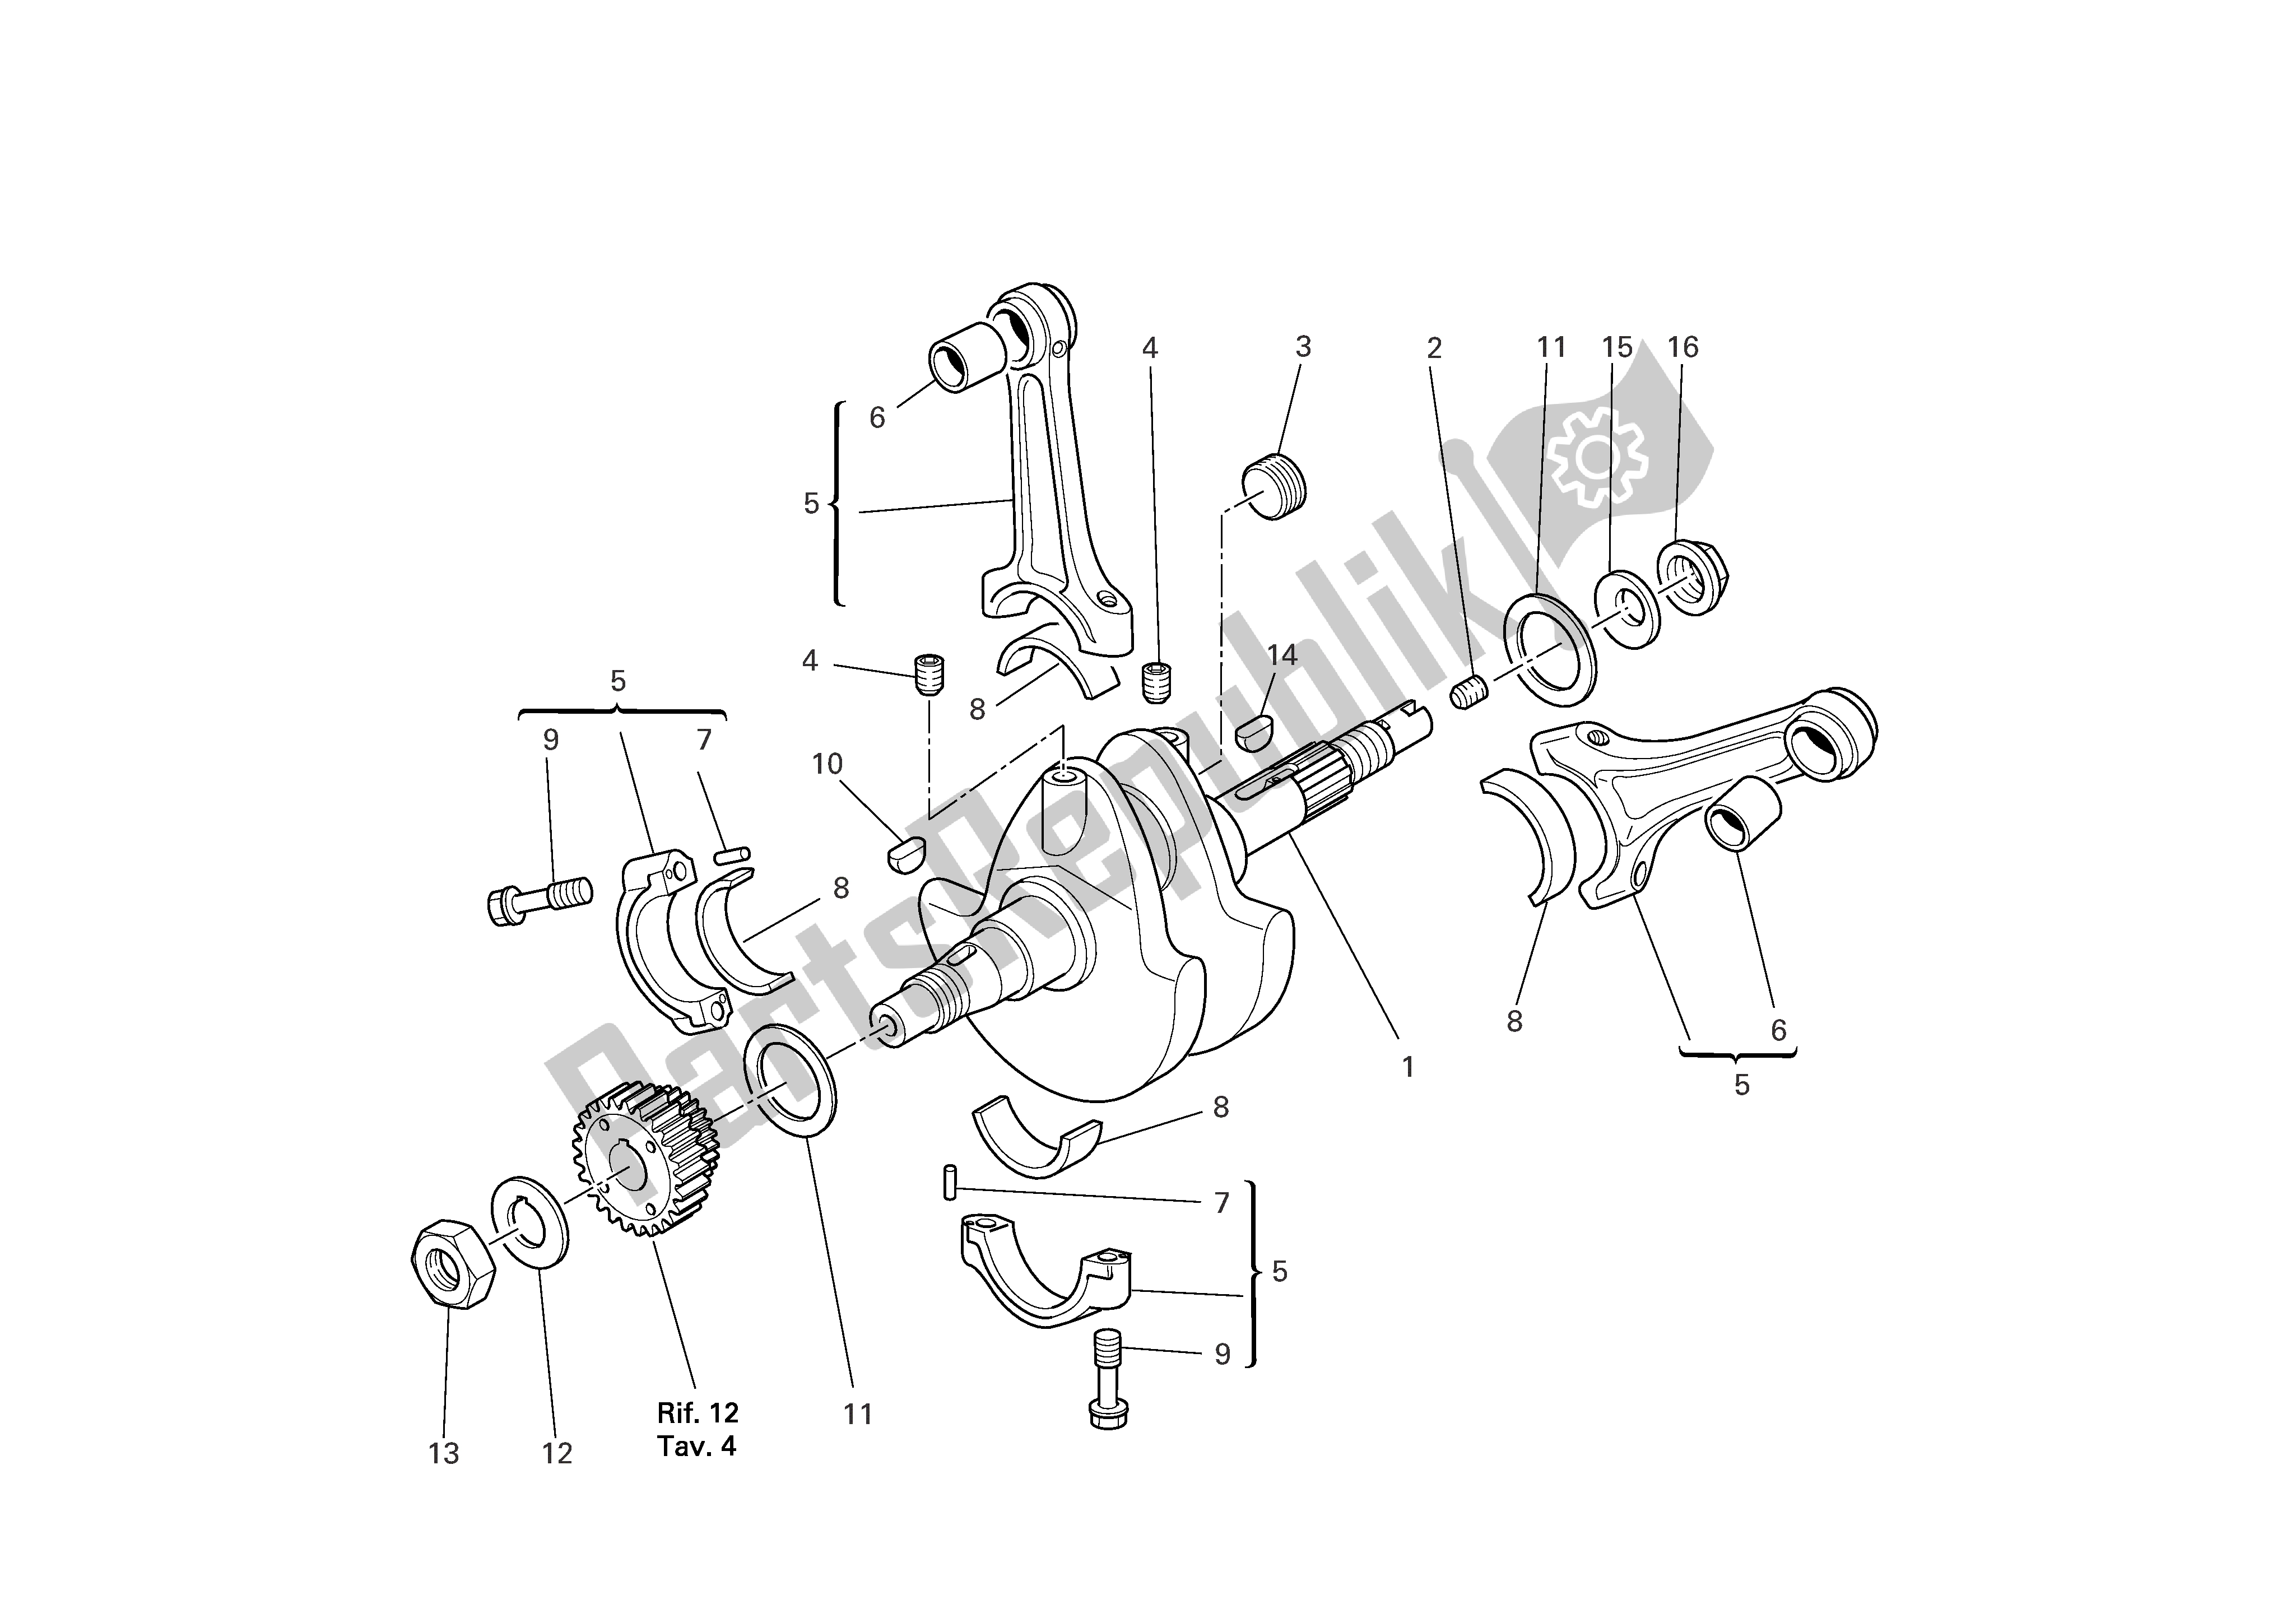 All parts for the Connecting Rods of the Ducati Monster Dark 620 2005